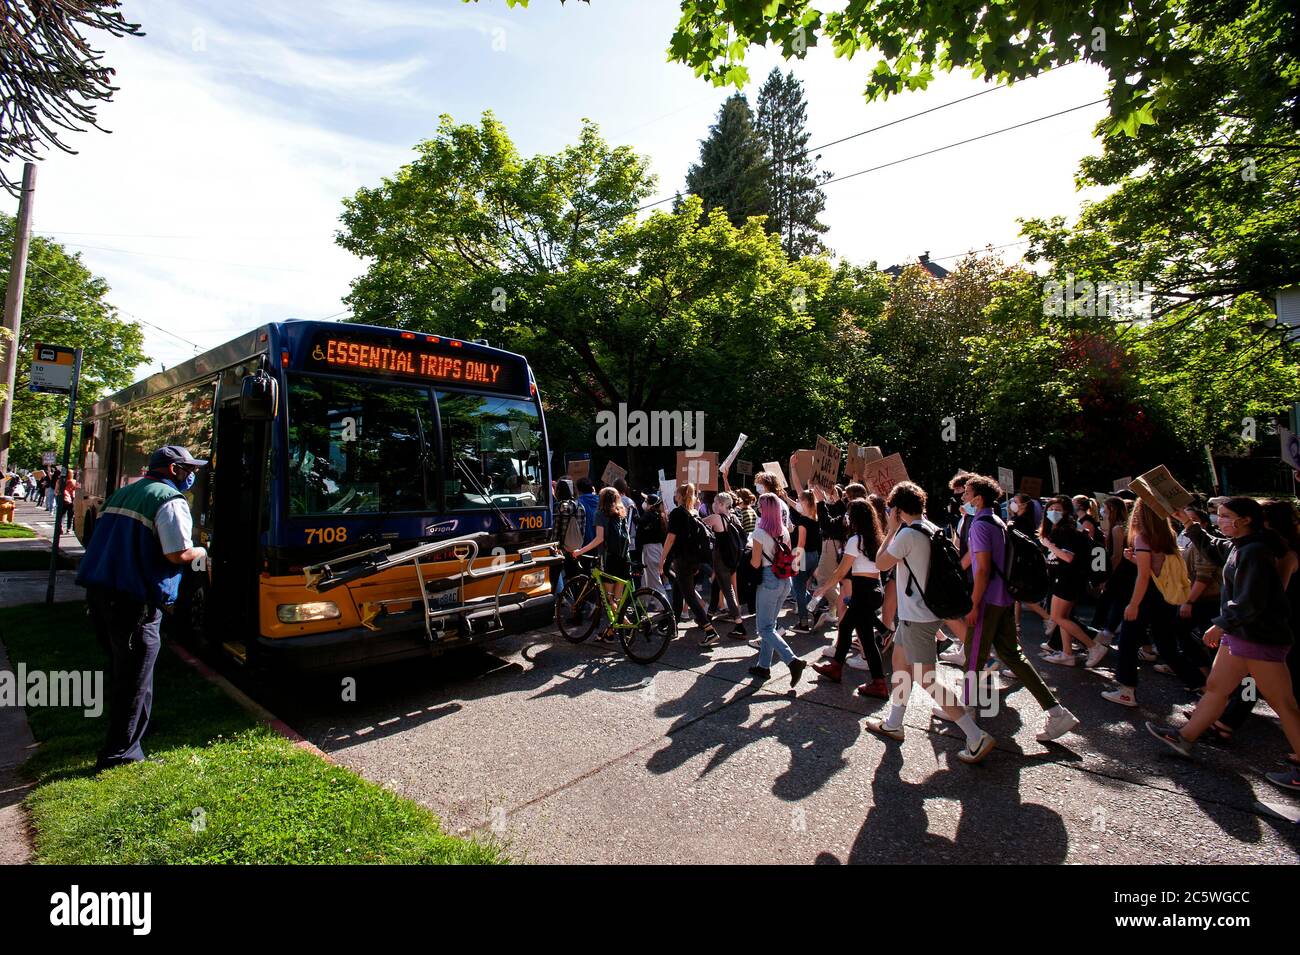 Seattle, Washington State. Student-led protest passing by city bus with 'Essential Trips Only' sign. Stock Photo